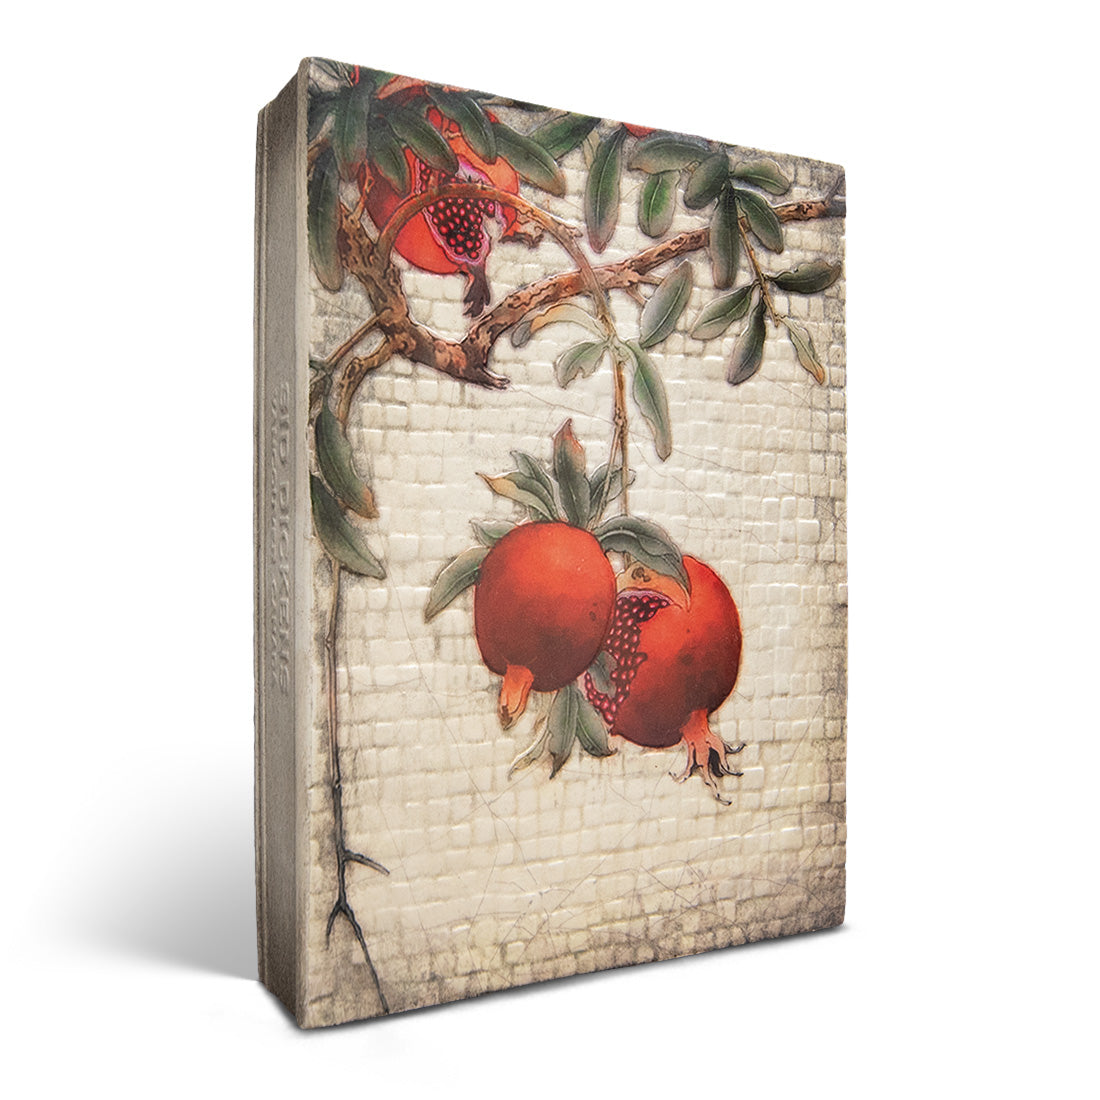 T 607 Pomegranate - Sid Dickens Collectable Tile side 2023 Fall Collection